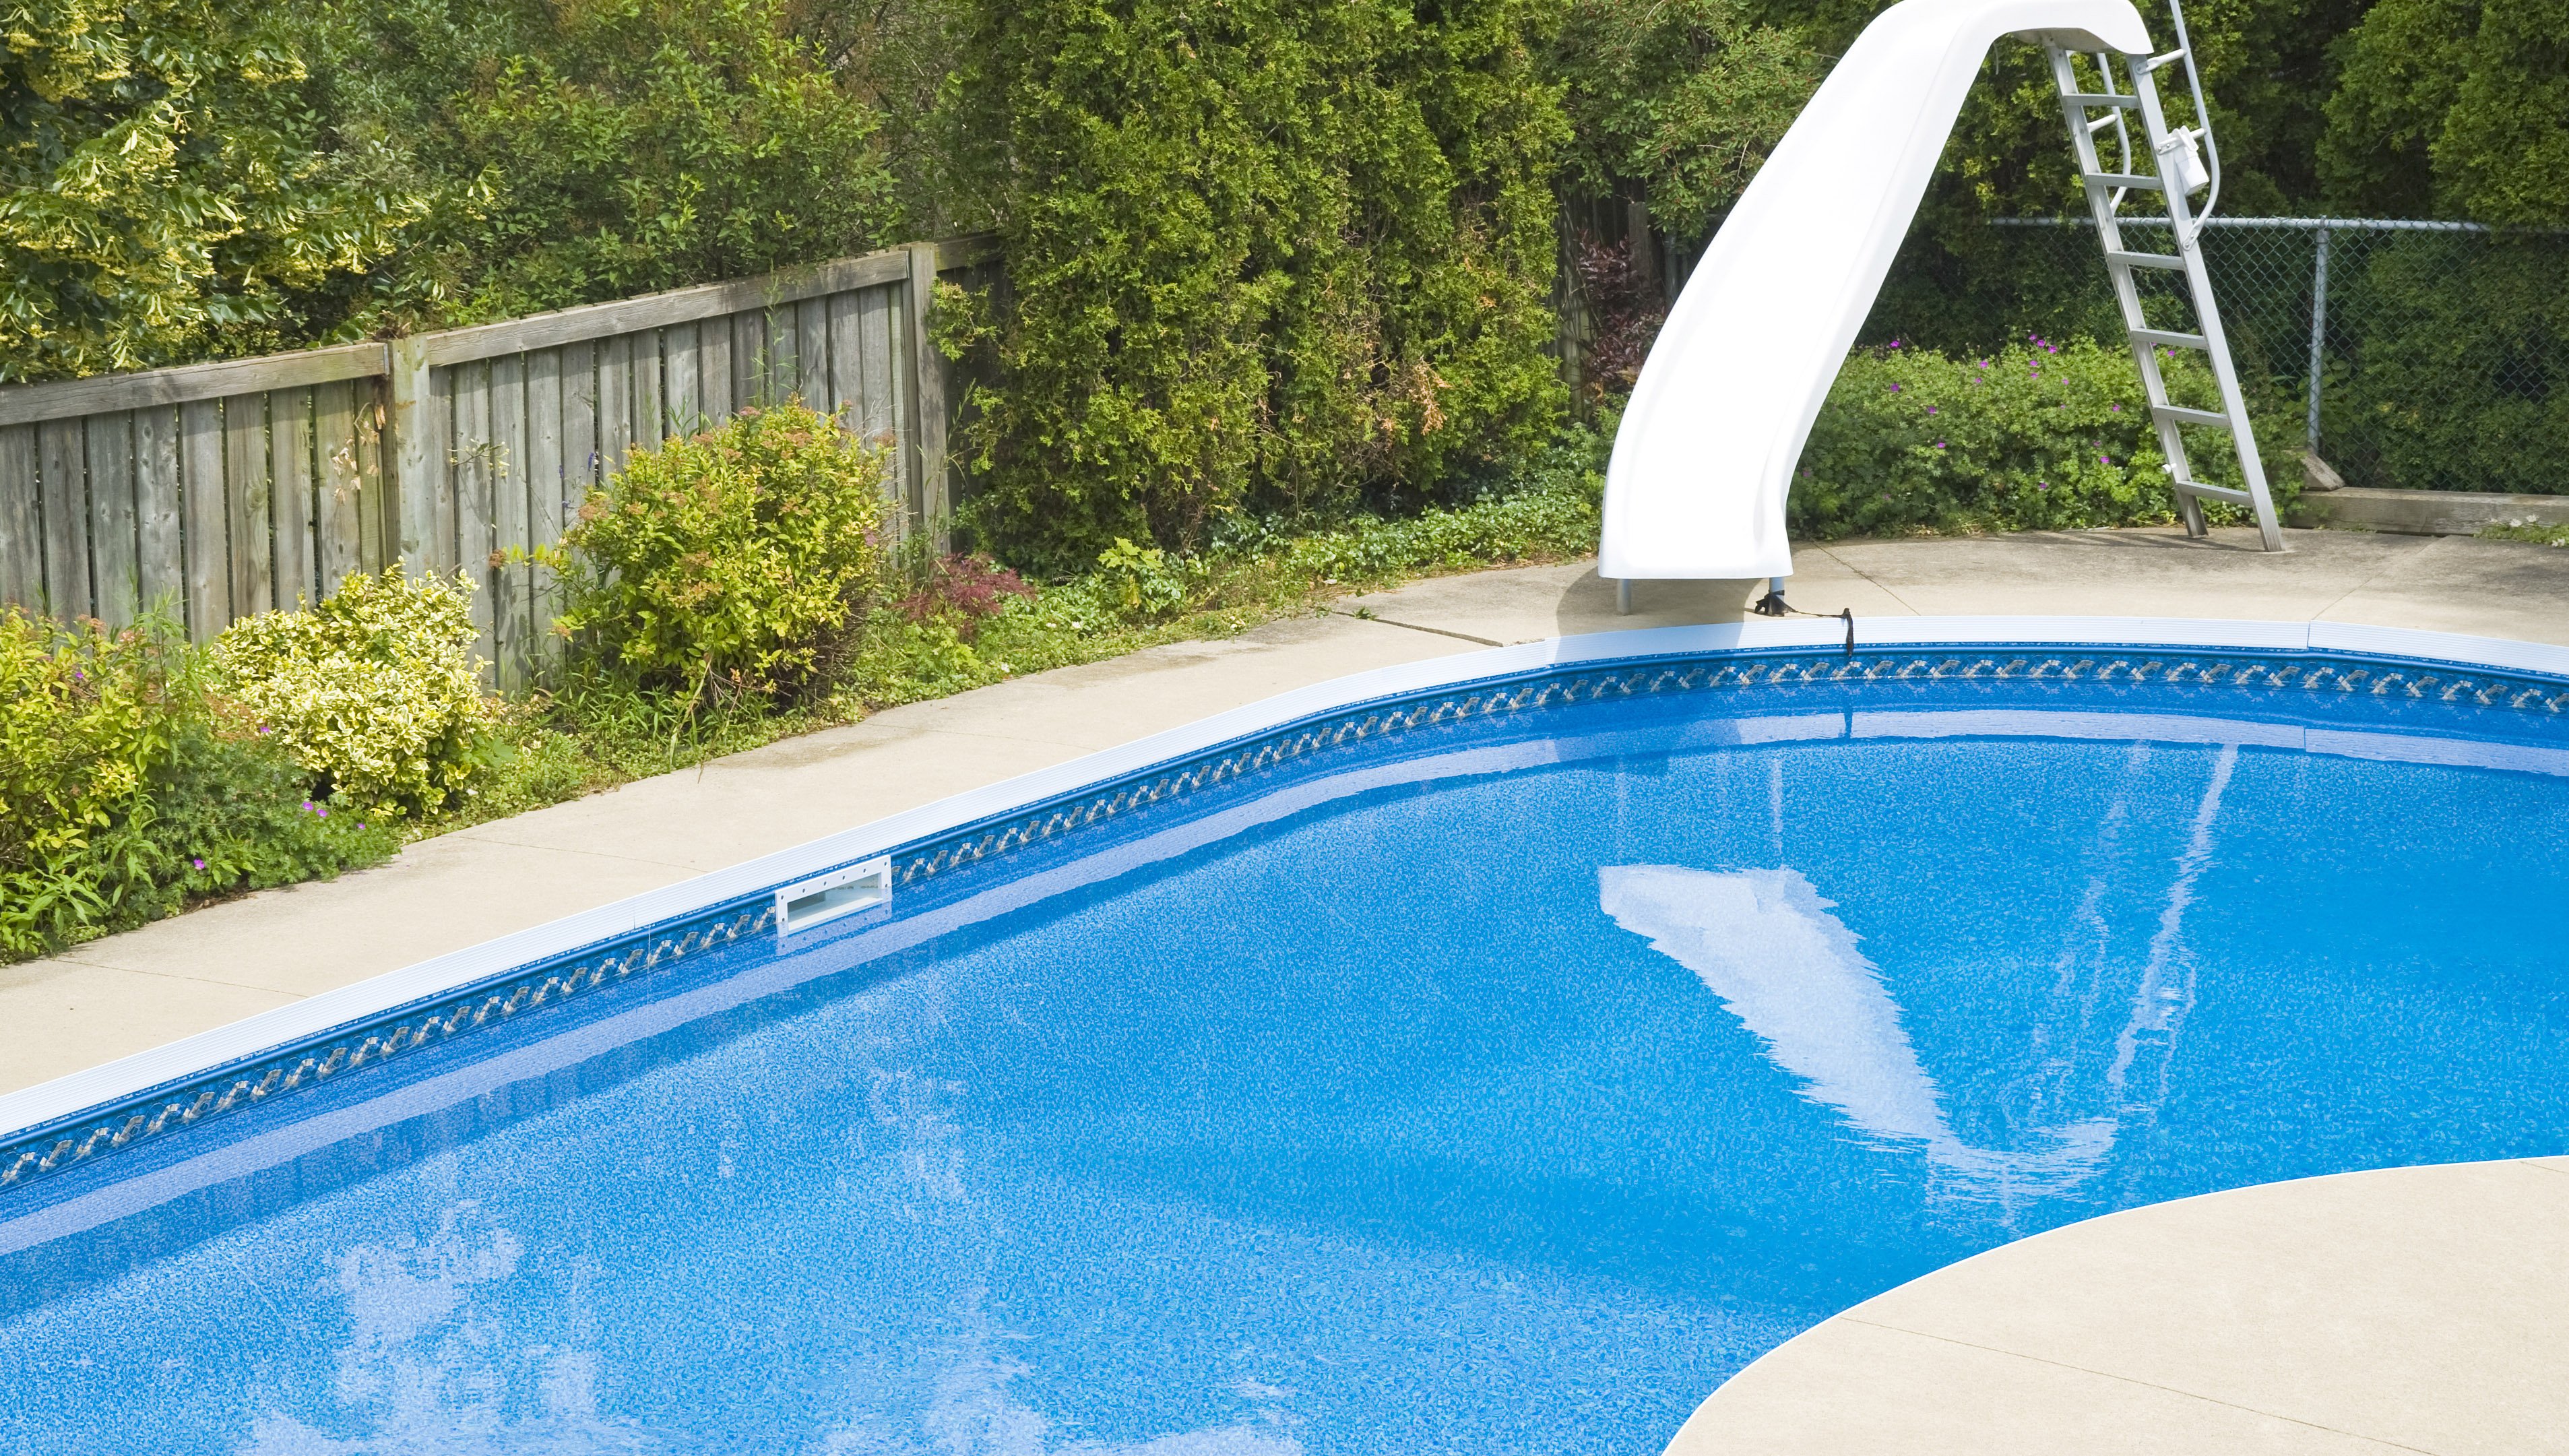 How to Clean Ring around Pool Liner